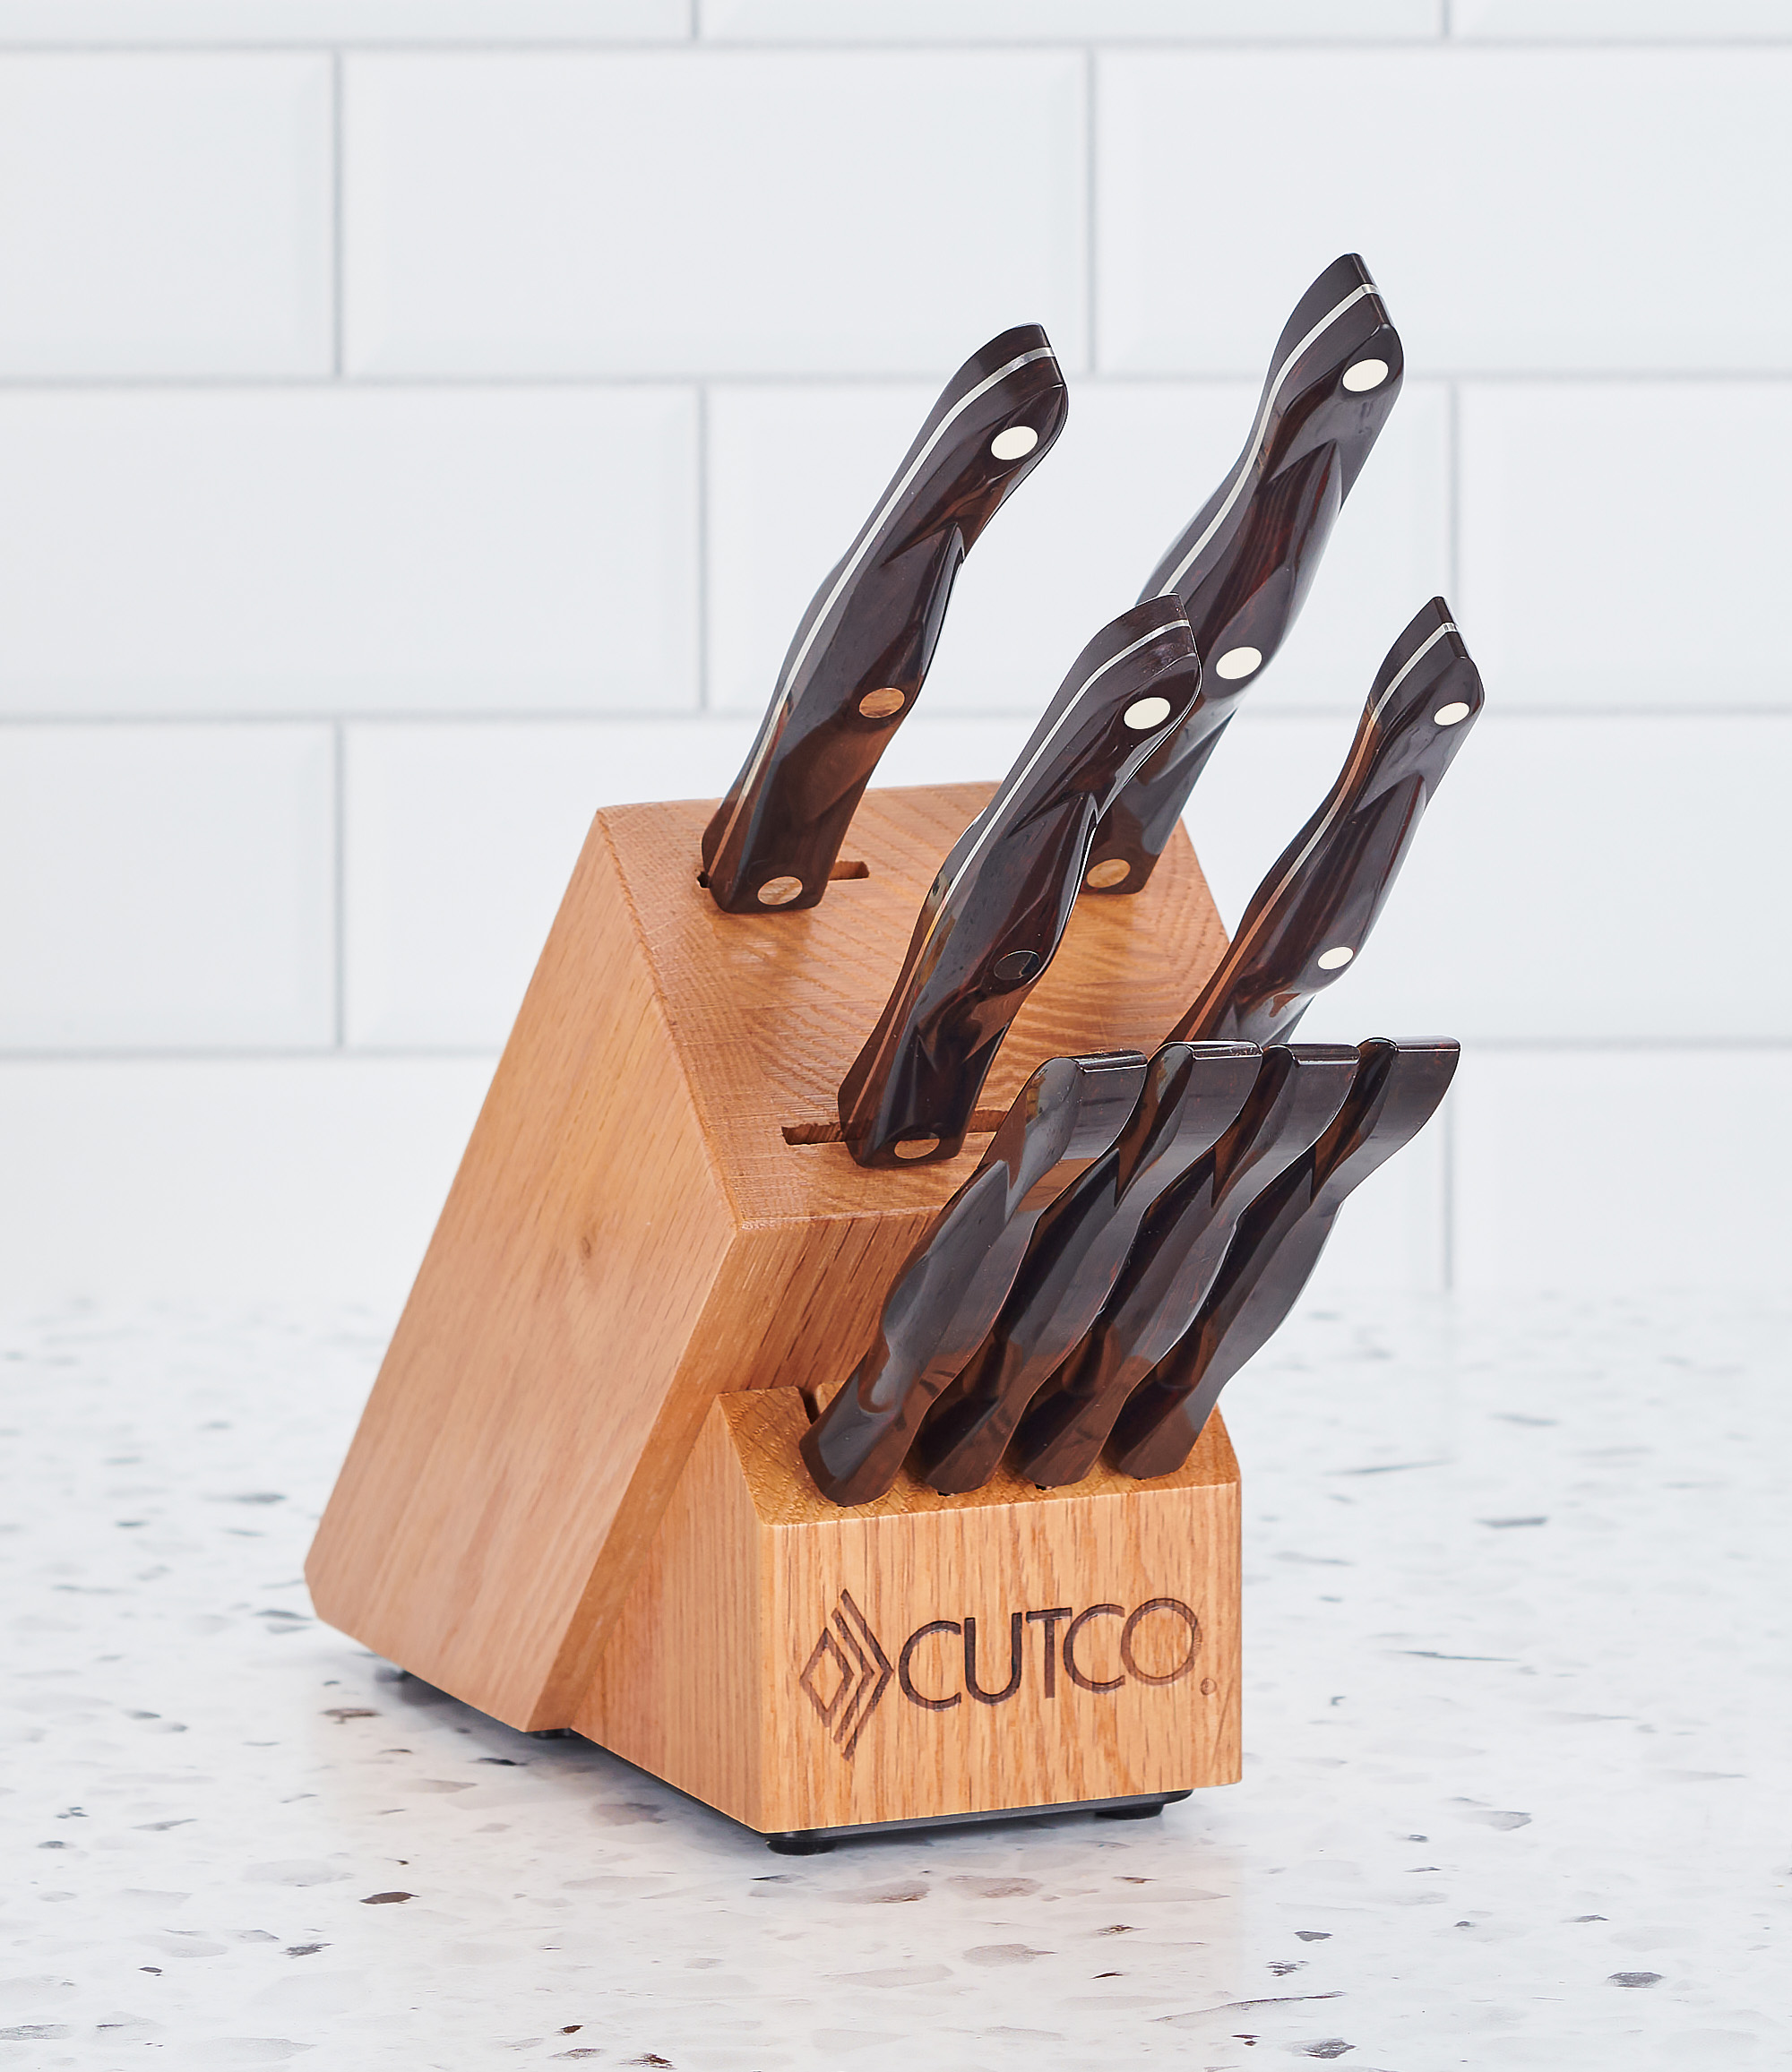 Studio Set with Block | 6 Pieces | Knife Block Sets by Cutco